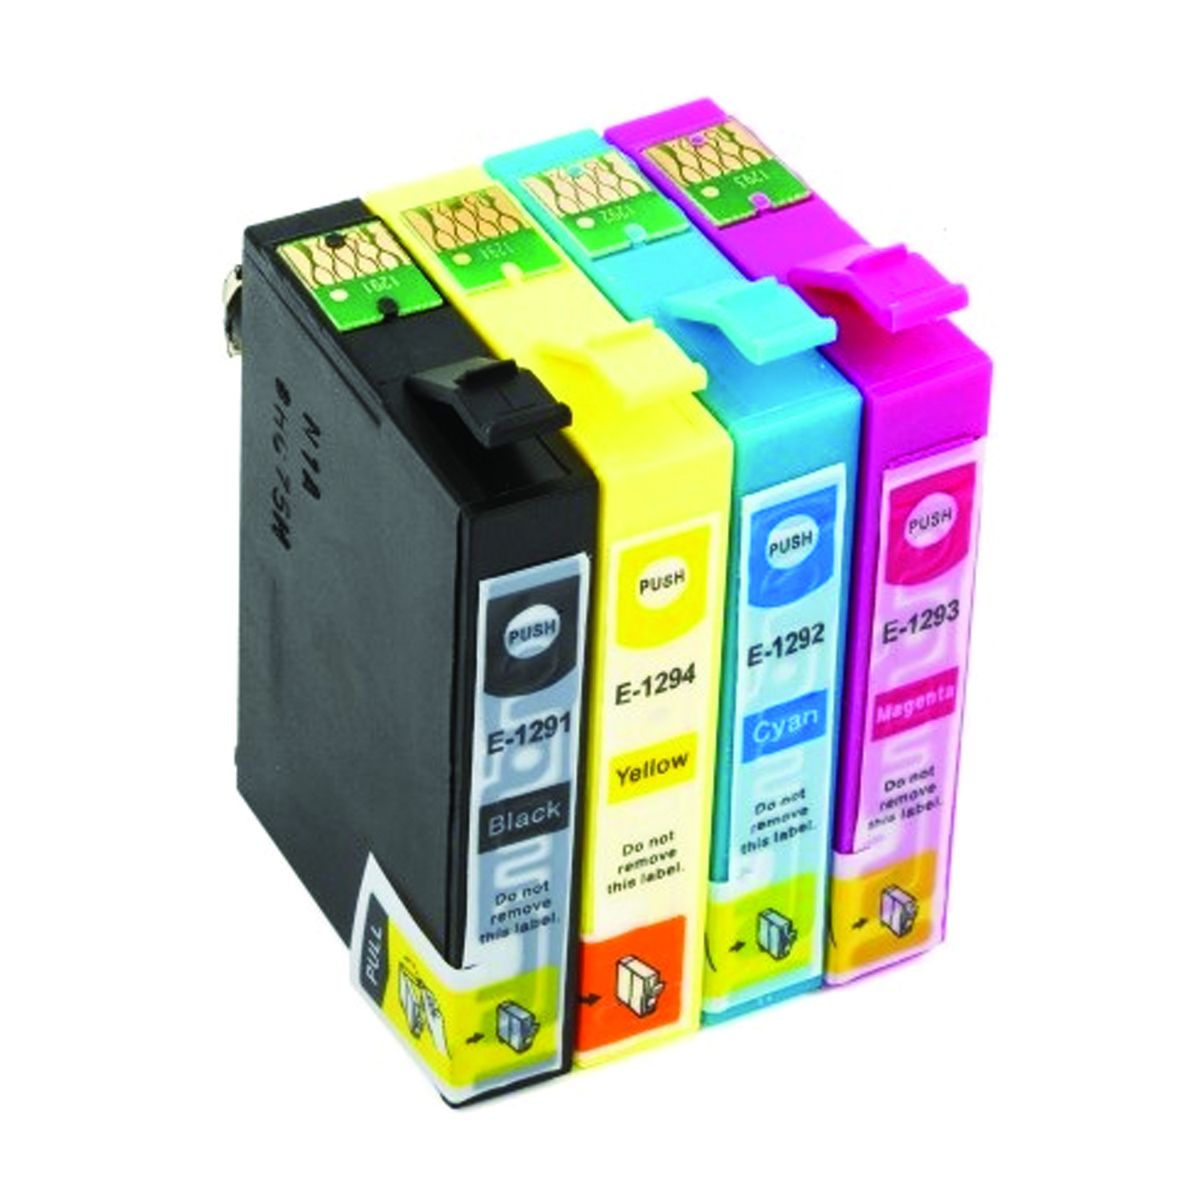 Compatible Epson T1291t1292t1293t1294 Ink Cartridge Combo Set Bcmy Shop Today Get It 8784